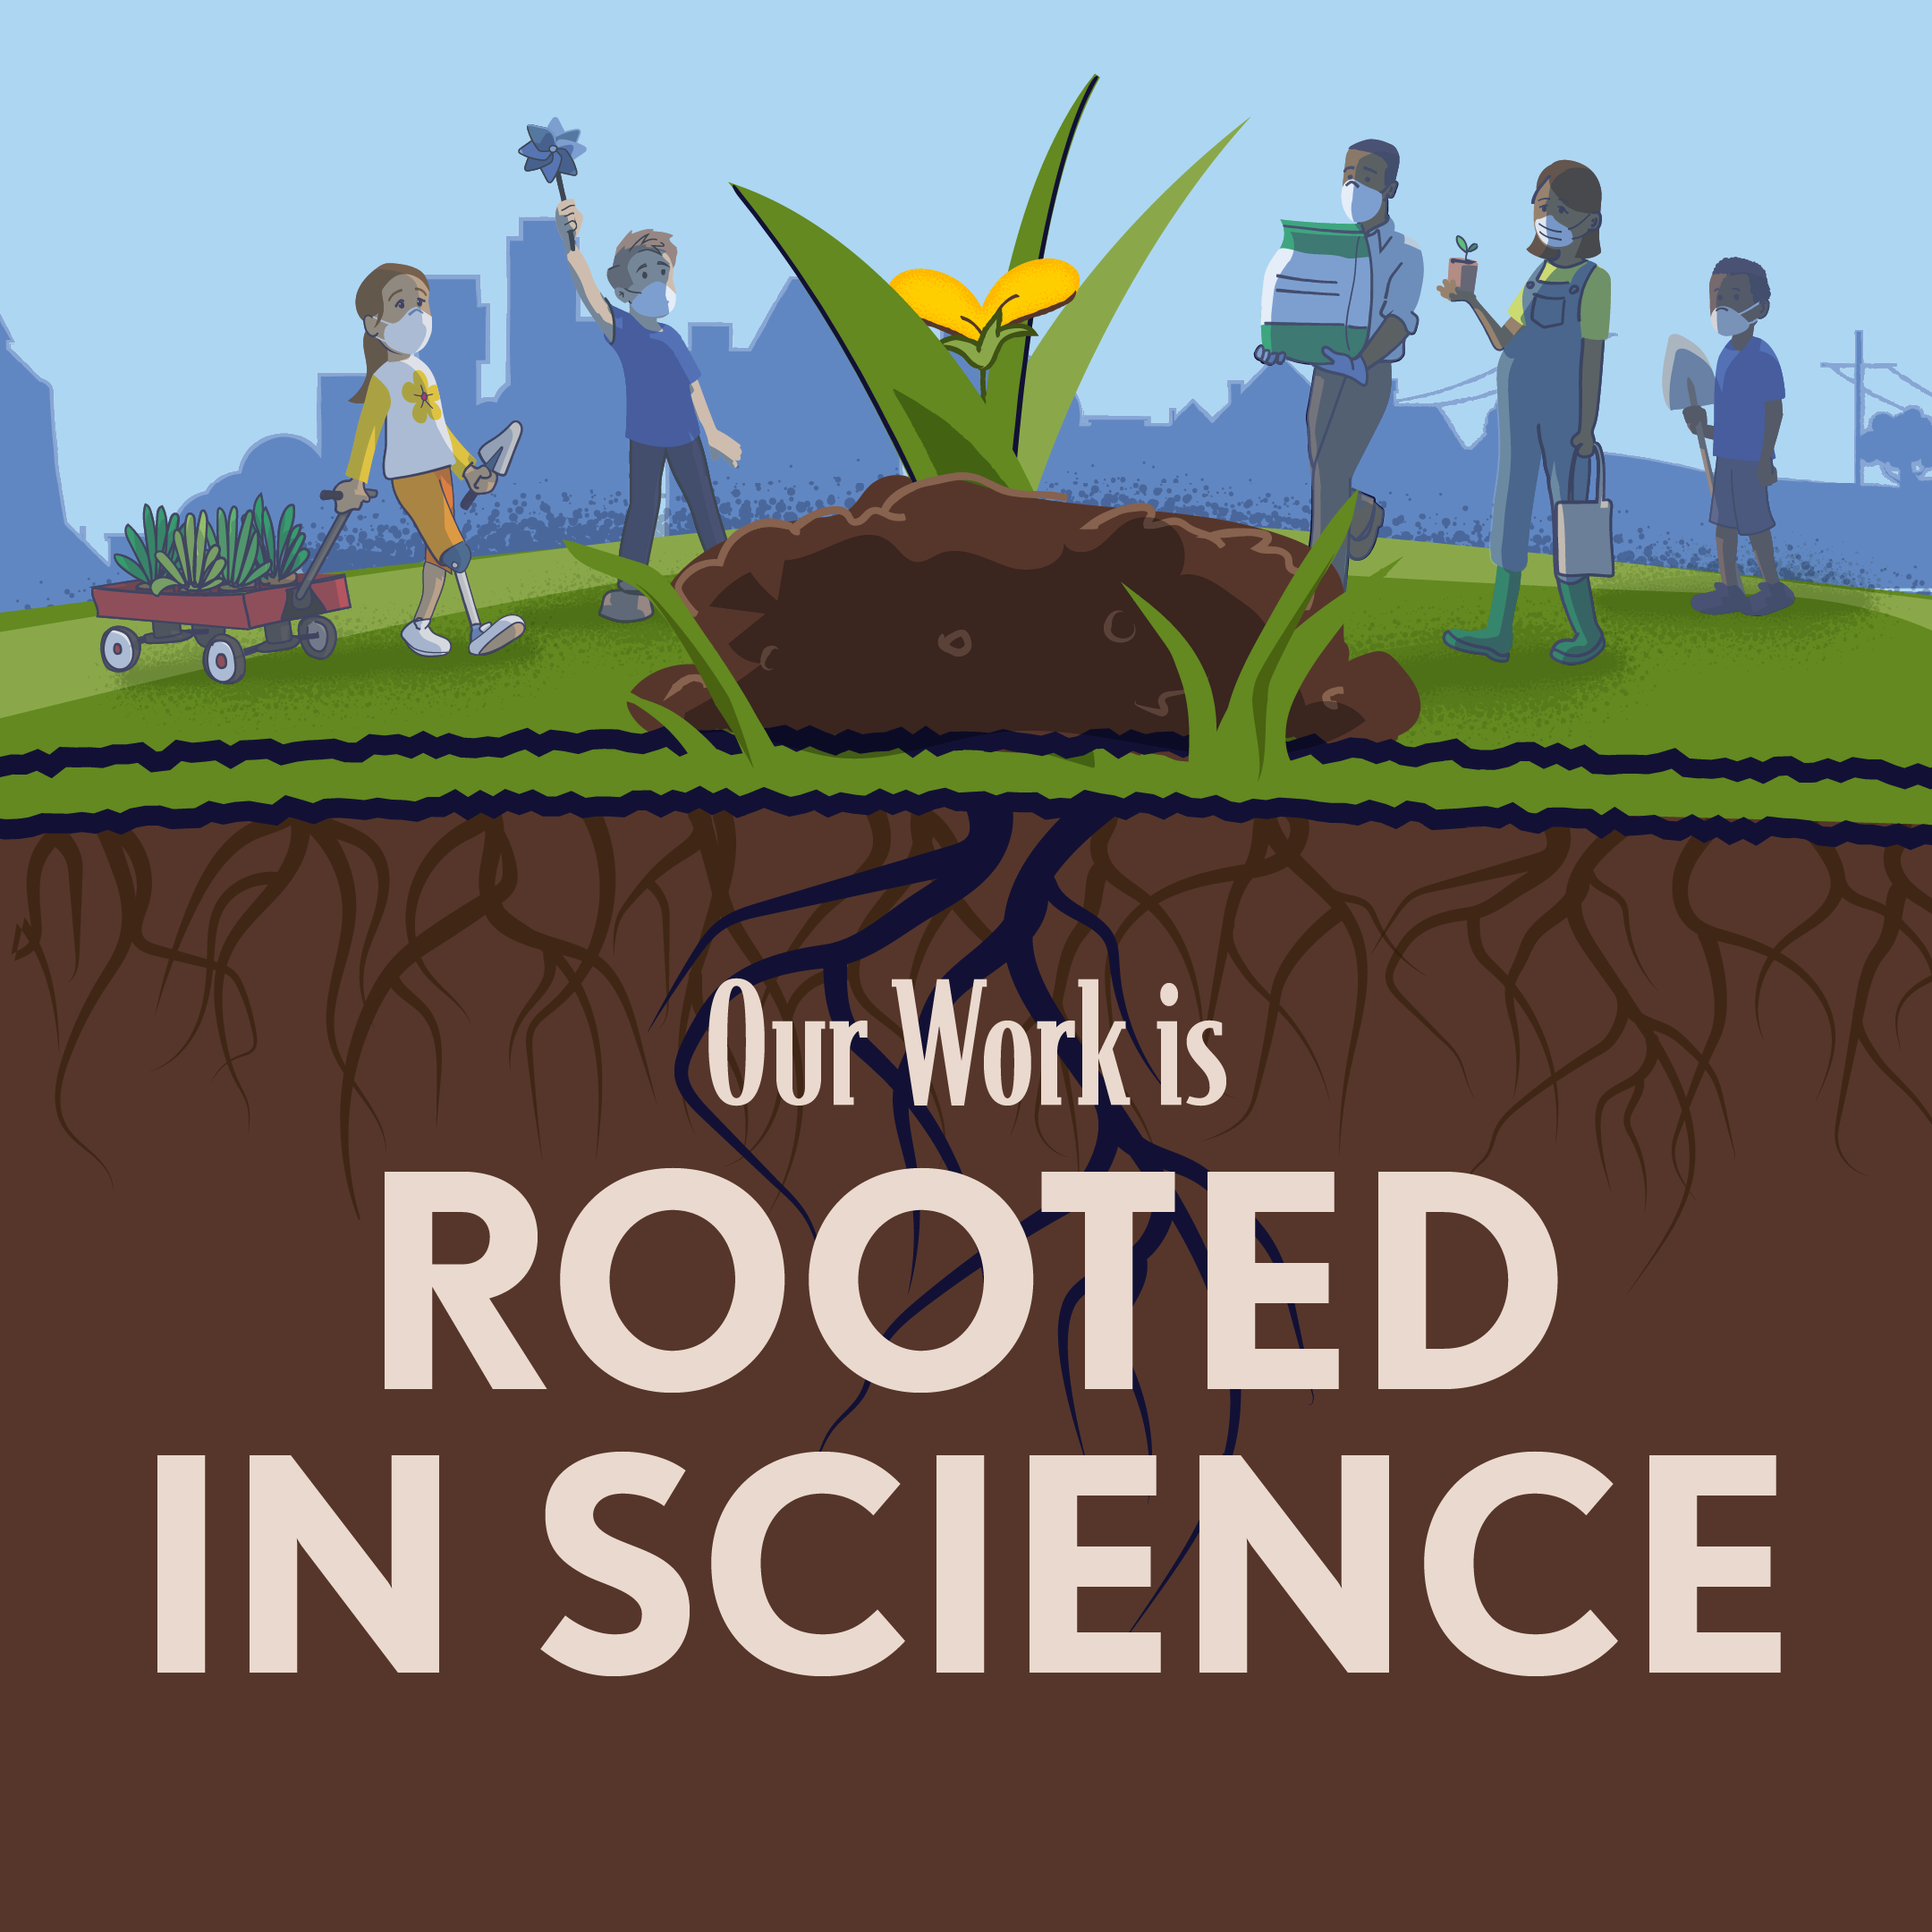 Our work is rooted in science